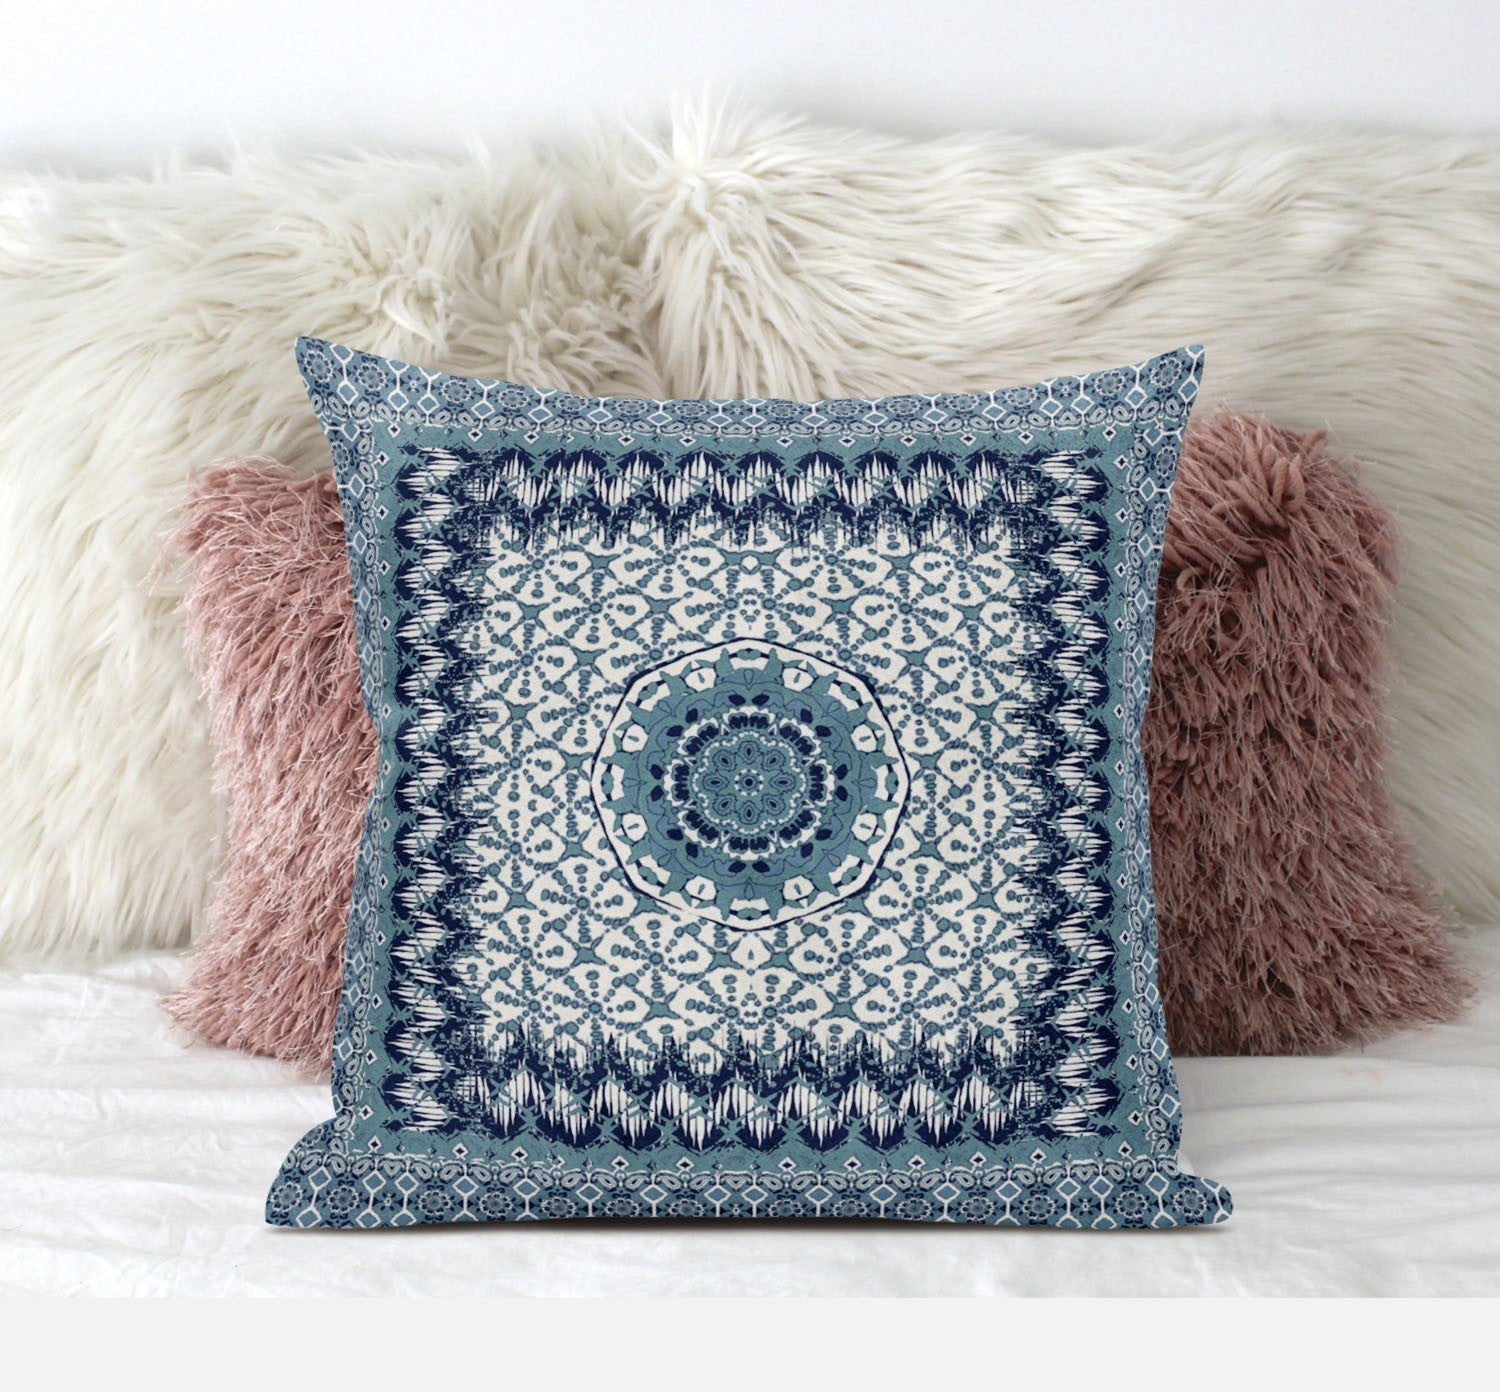 16” Blue White Holy Floral Suede Throw Pillow